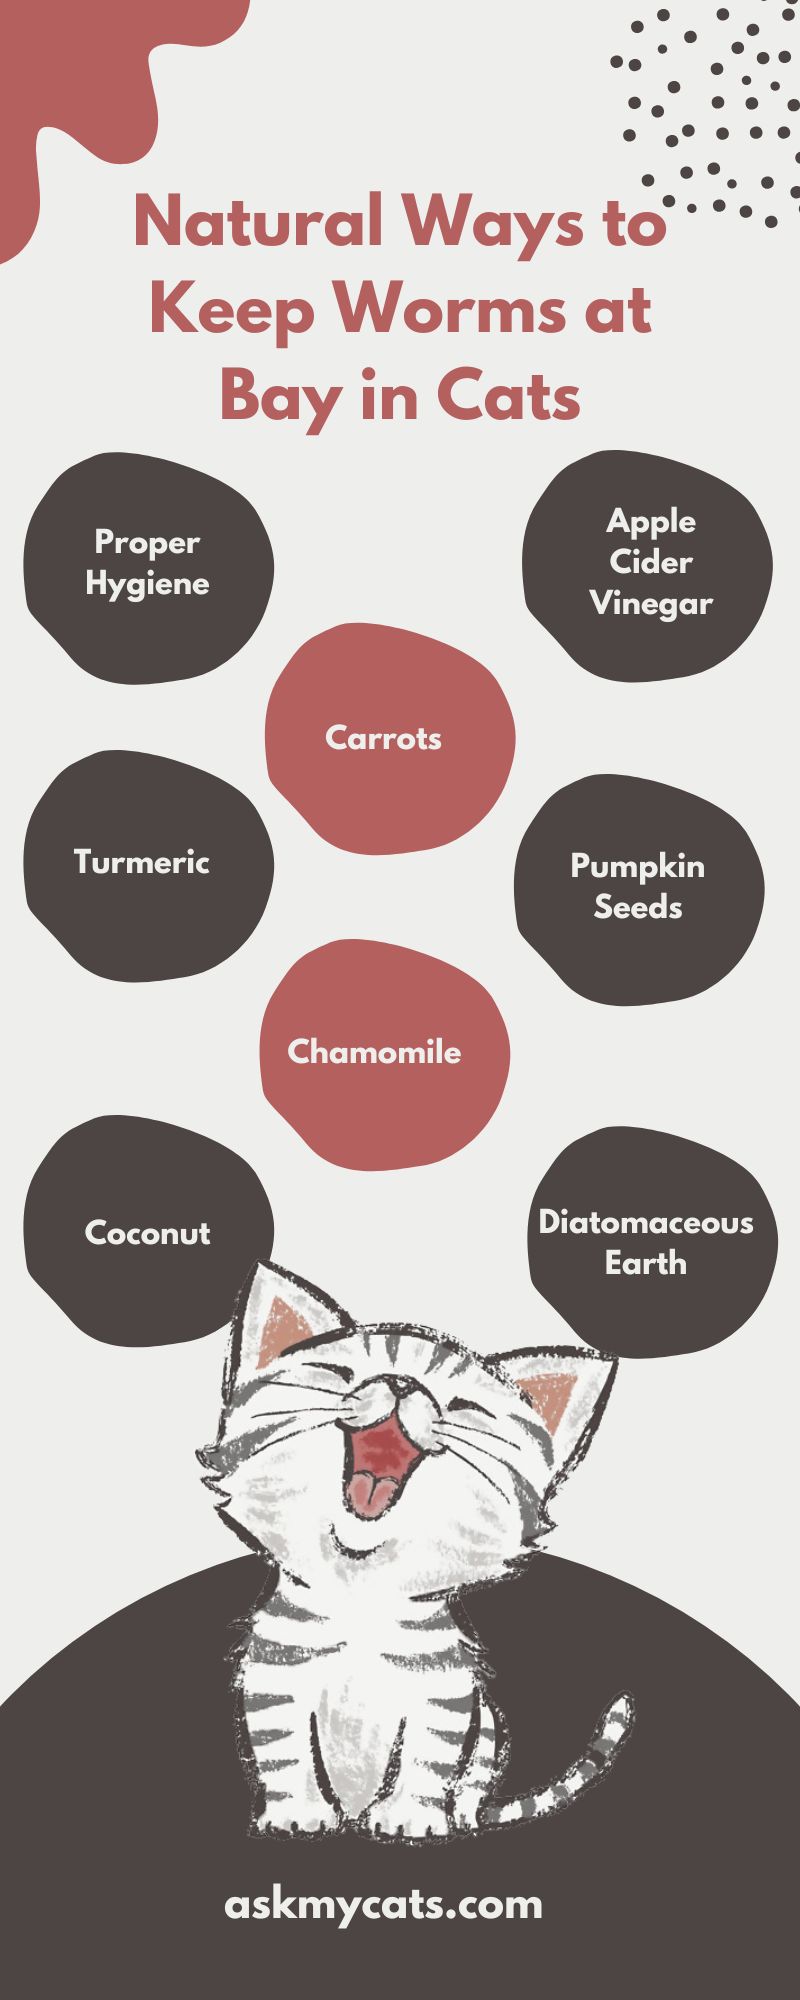 Natural Ways to Keep Worms at Bay in Cats (Infographic)